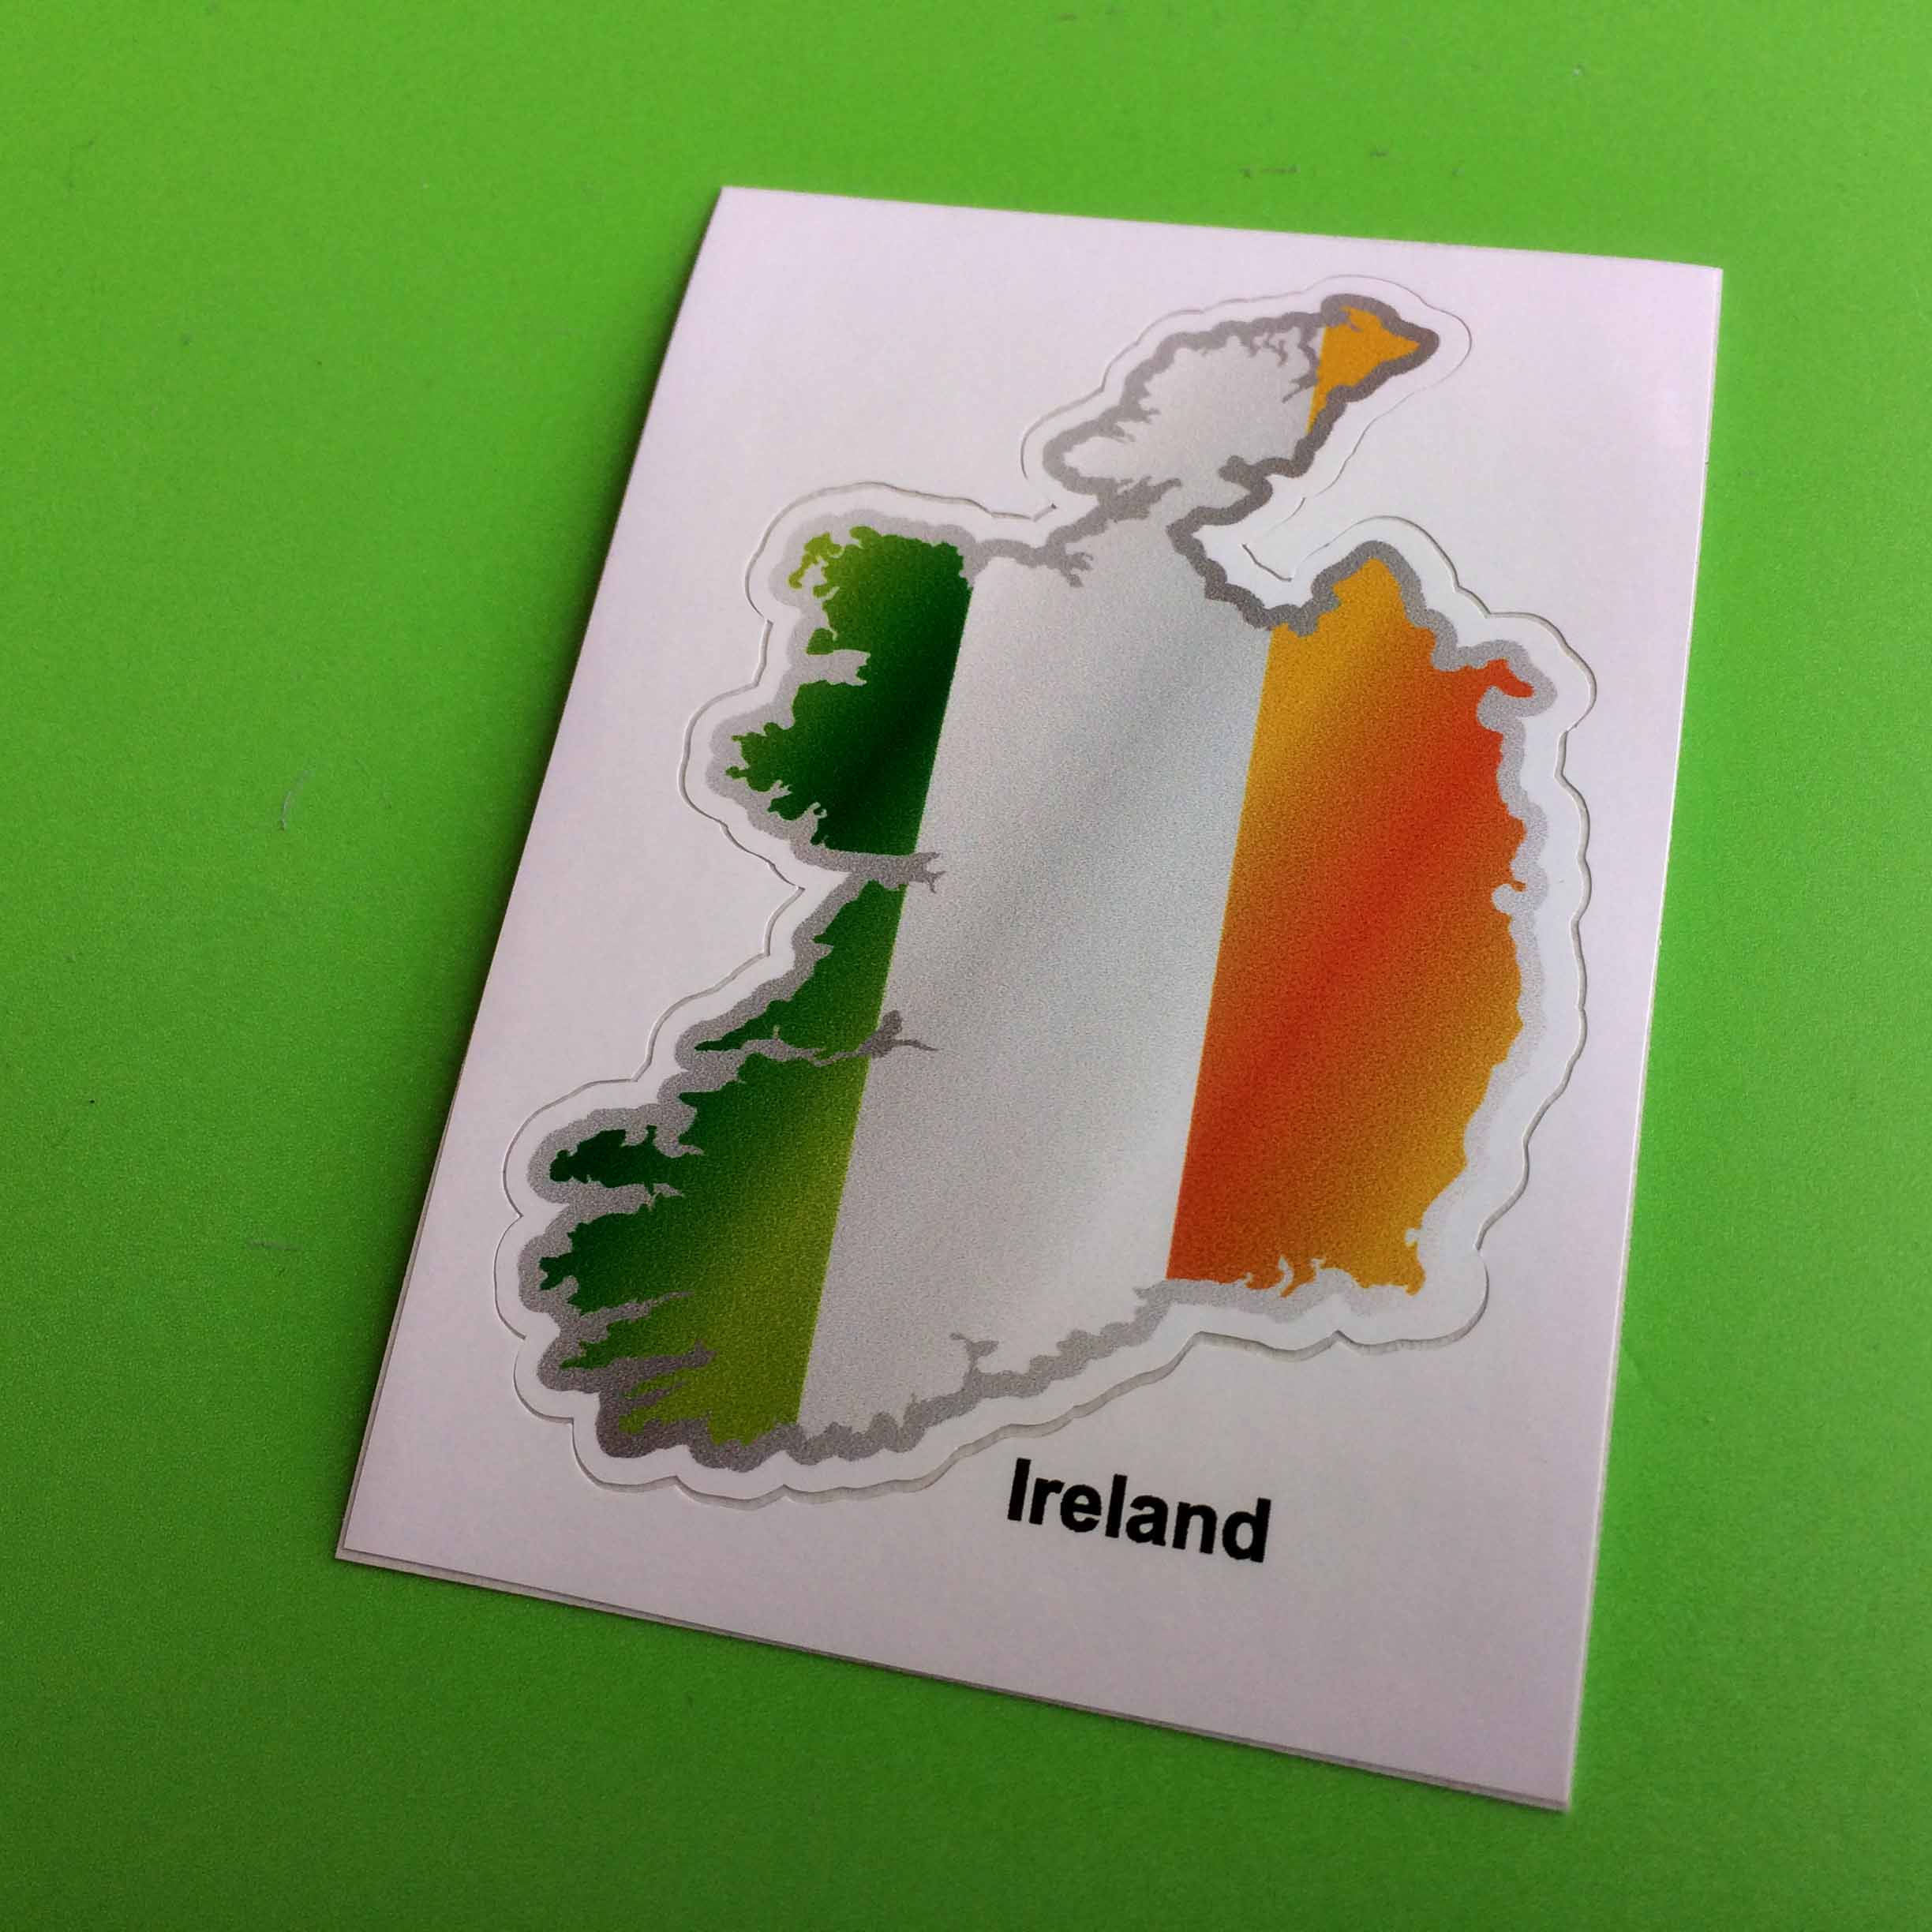 An Ireland flag and map. A vertical tricolour of green, white and orange.